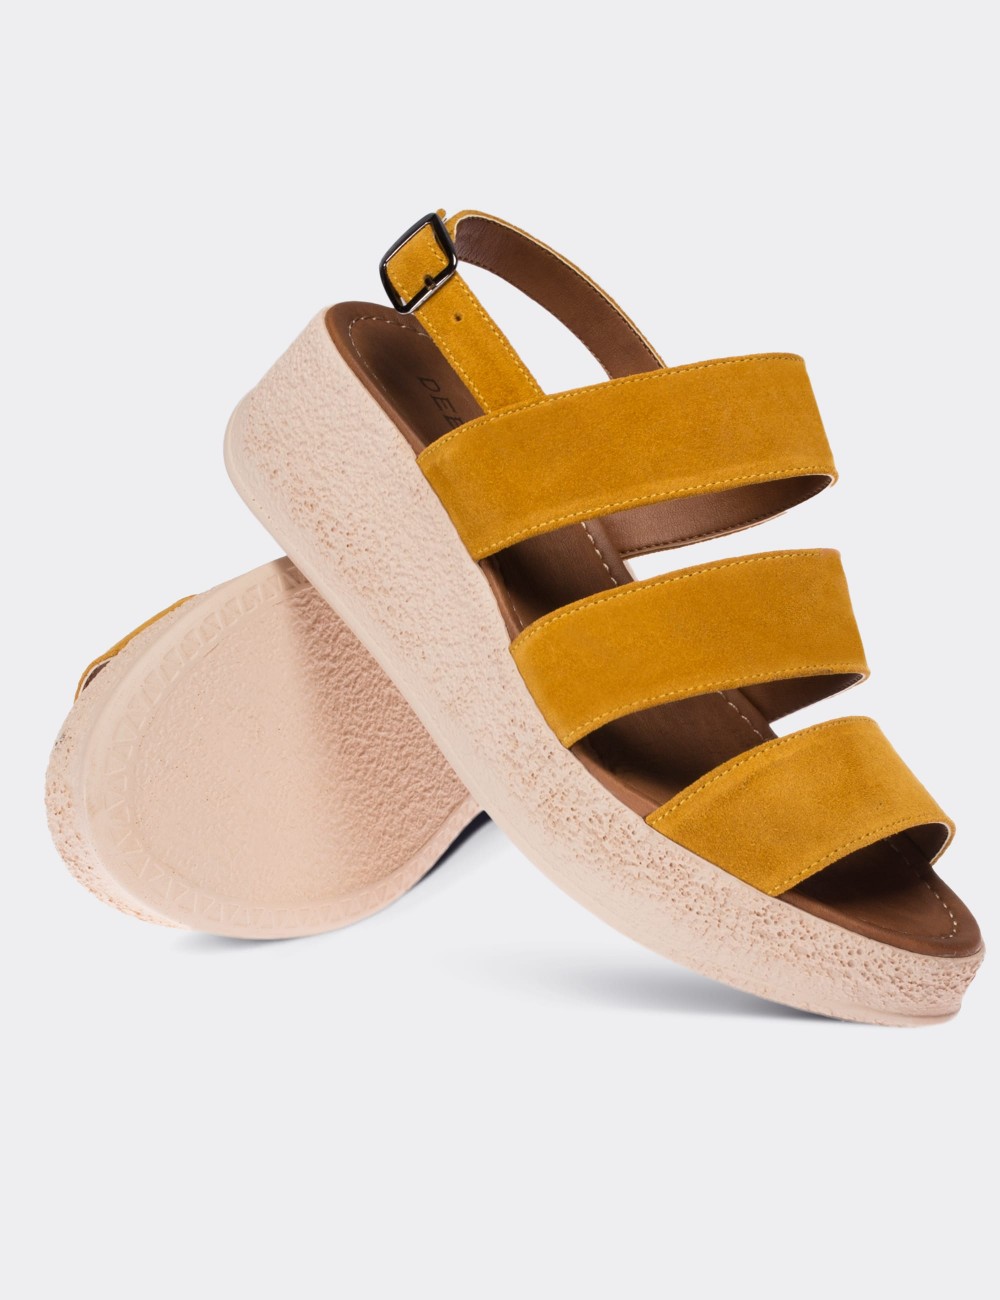 Yellow Suede Leather Sandals - 02123ZHRDP01